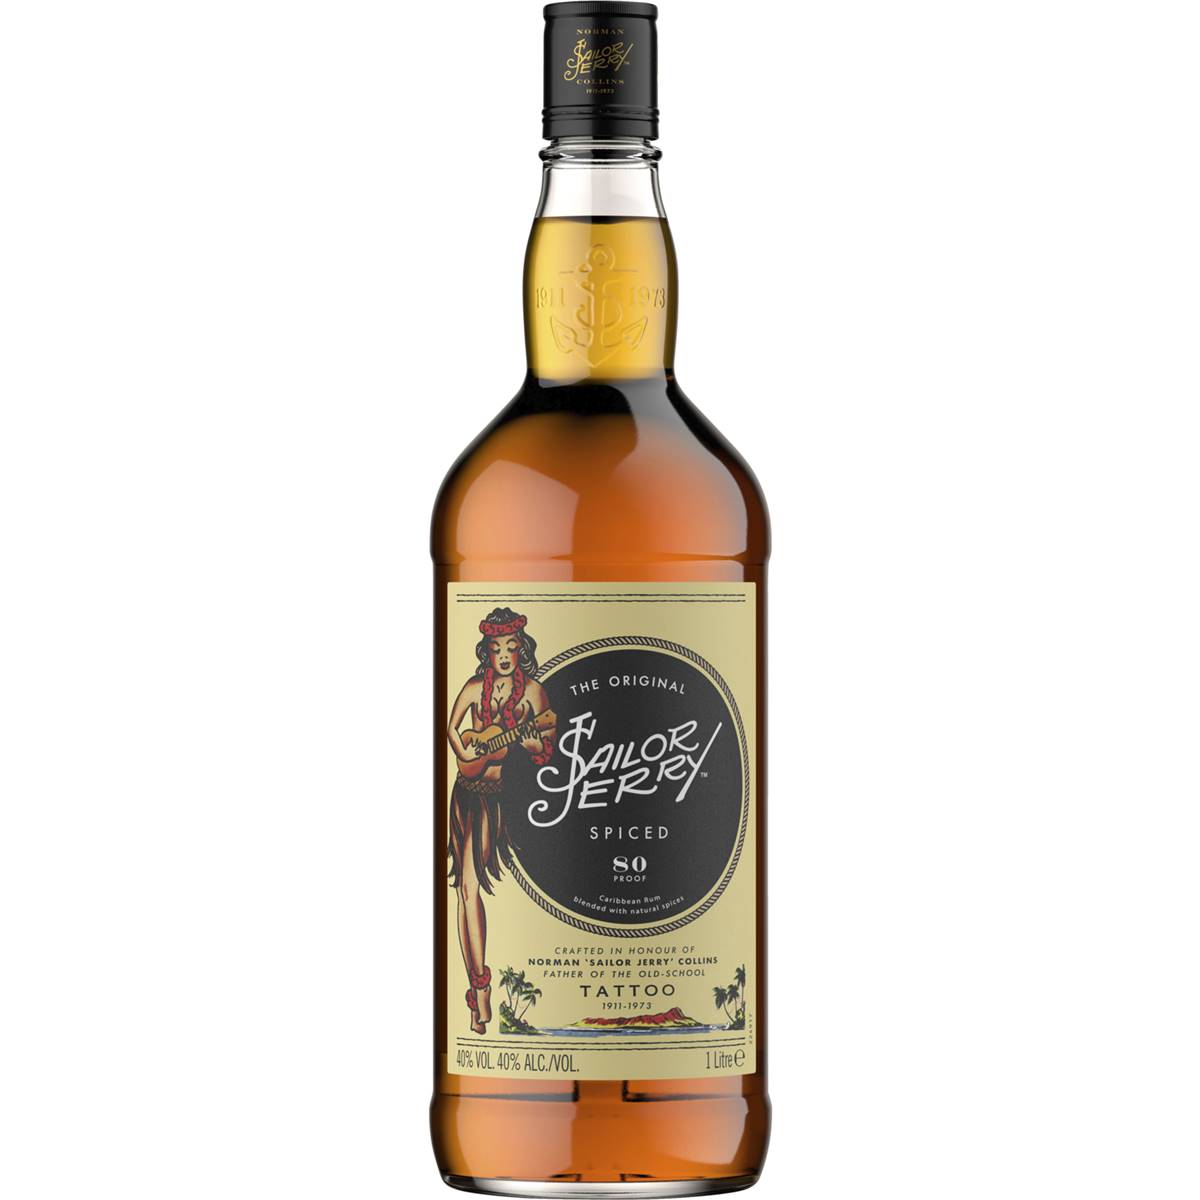 Calories in Sailor Jerry Spiced Rum